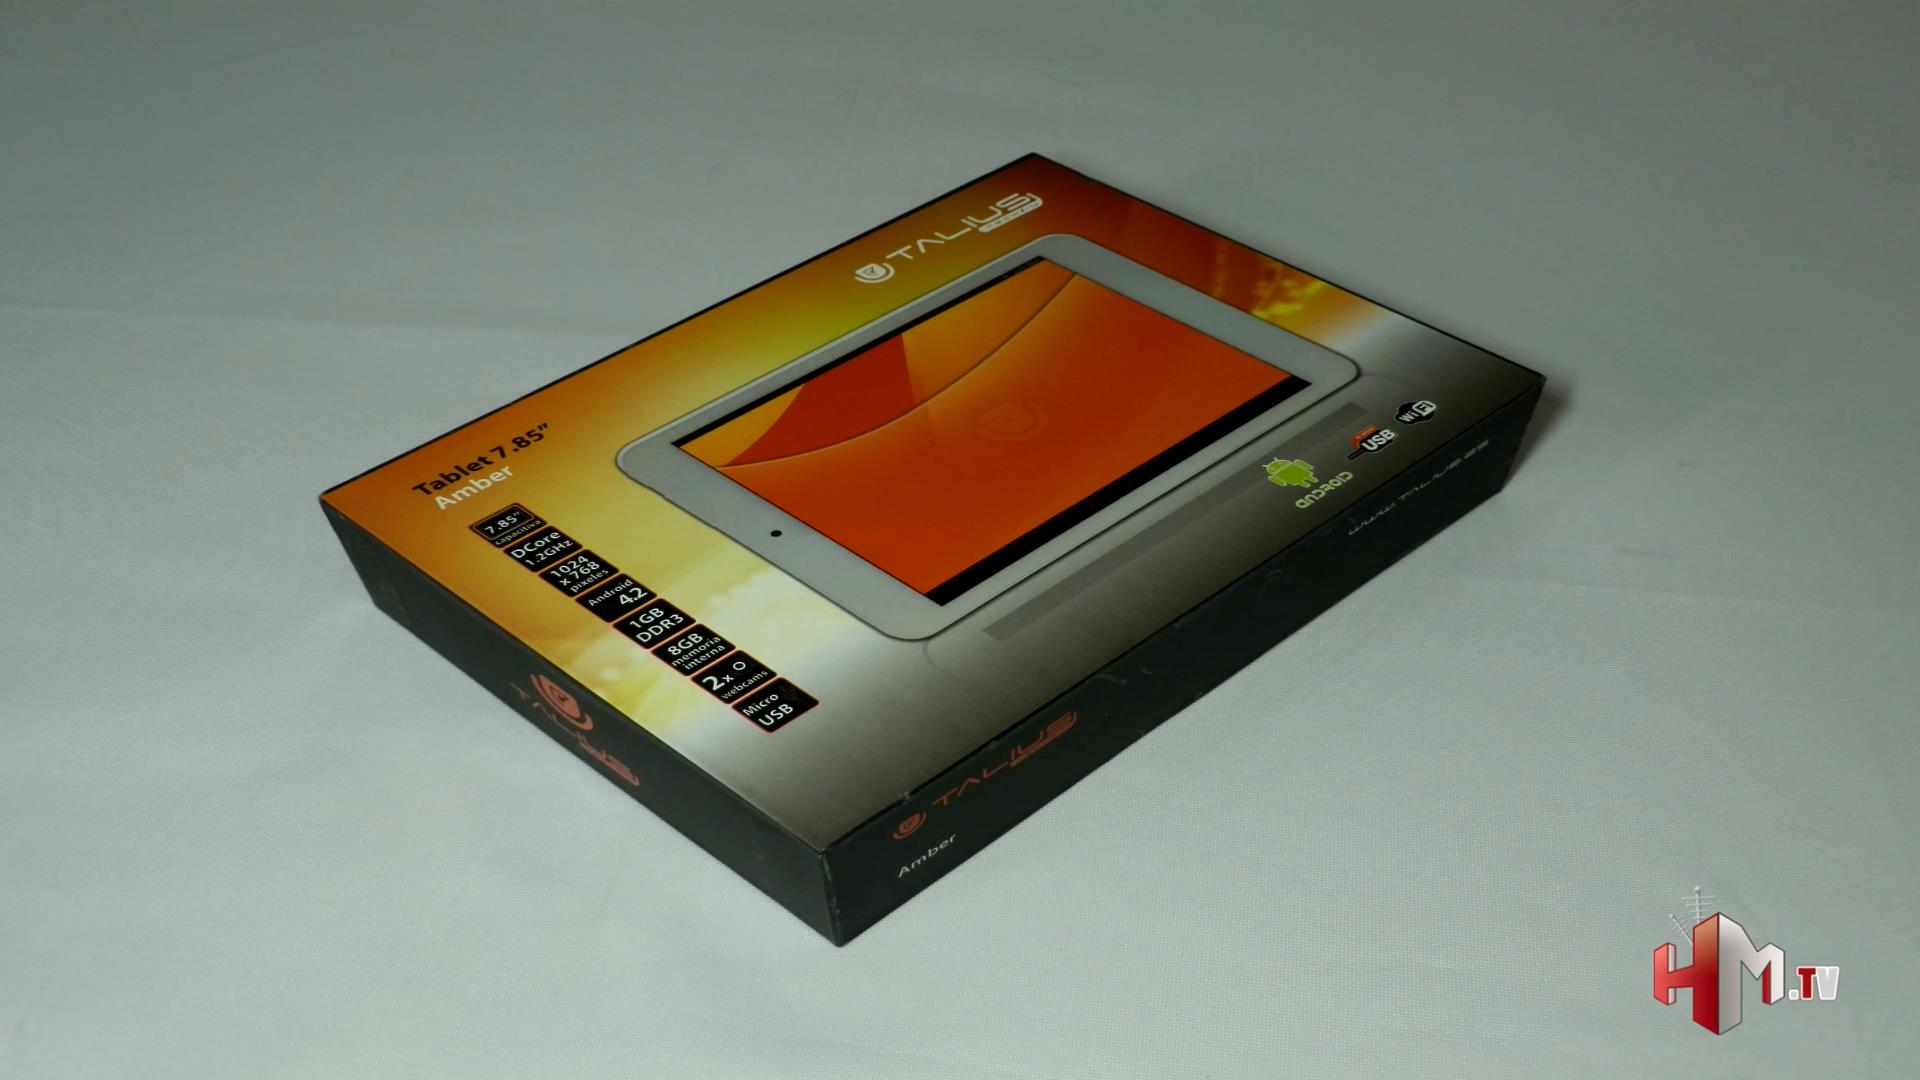 videoreview tablet Talius Amber